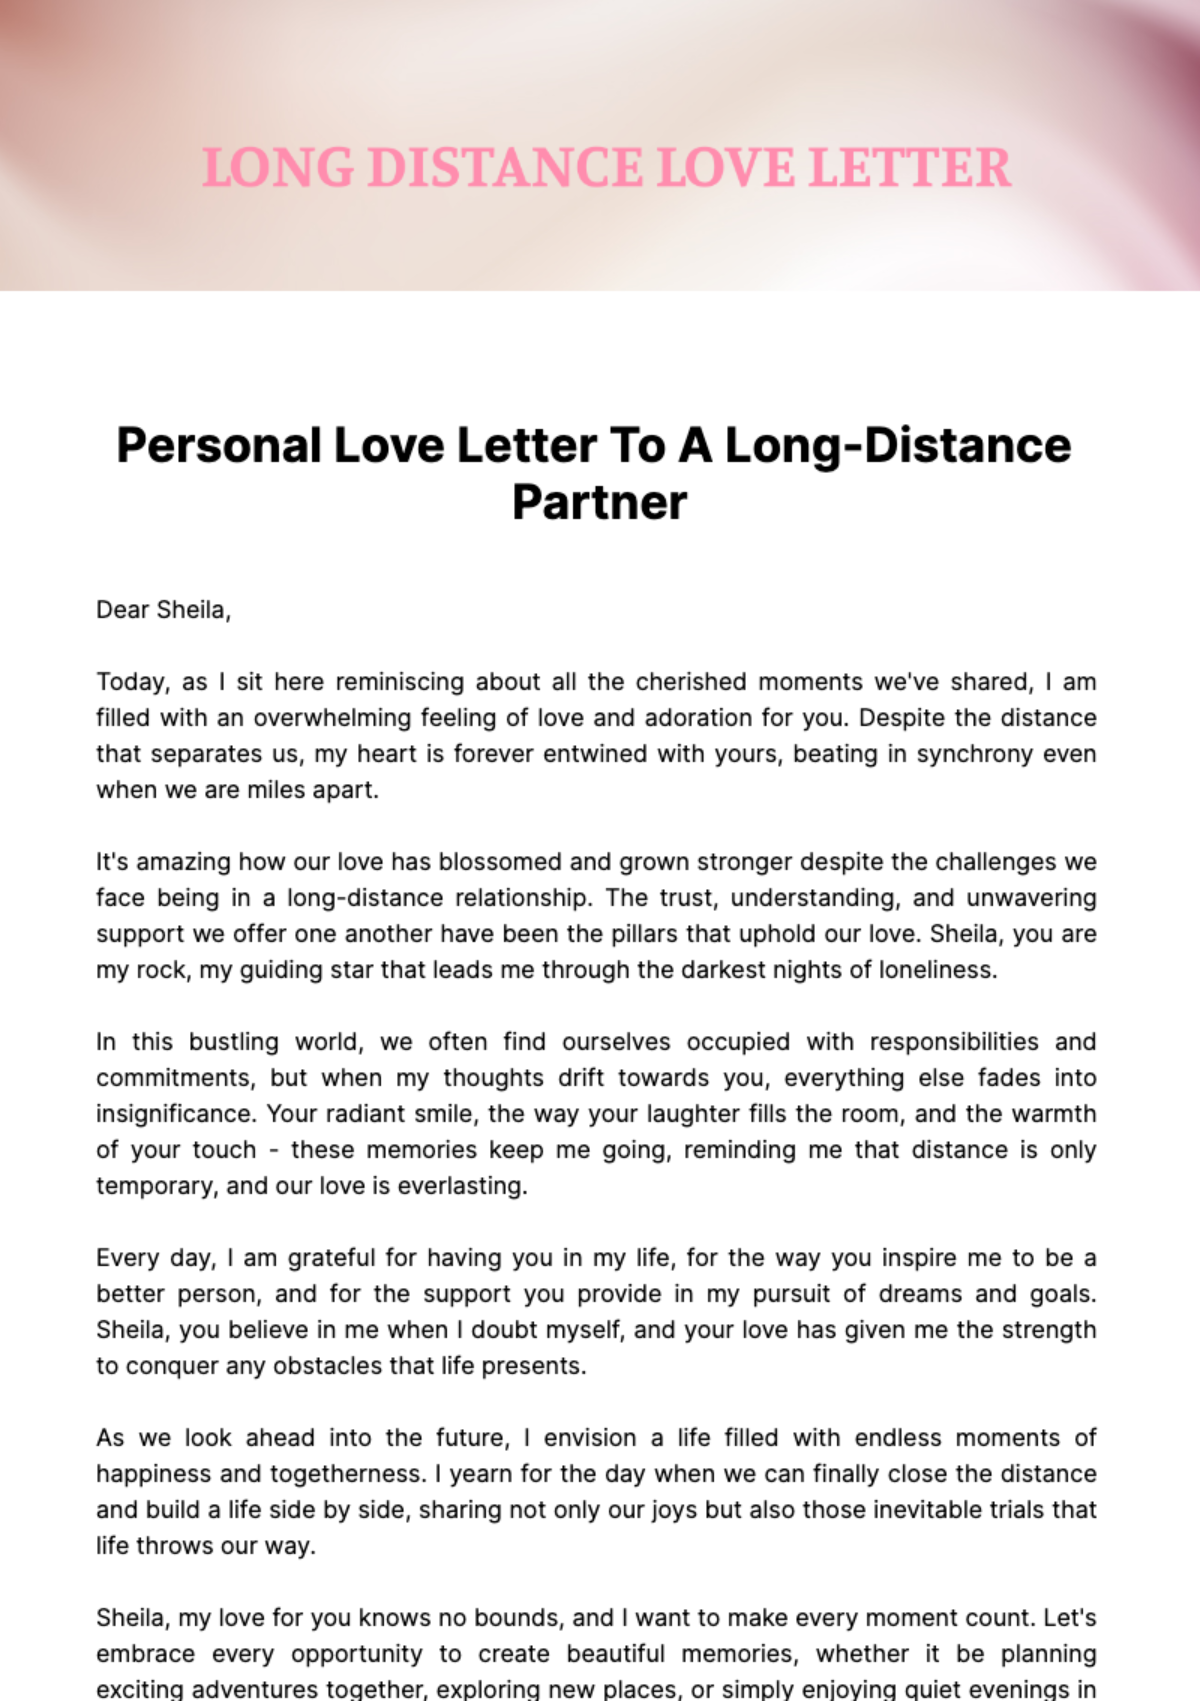 Free Personal Love Letter to a Long-Distance Partner  Template